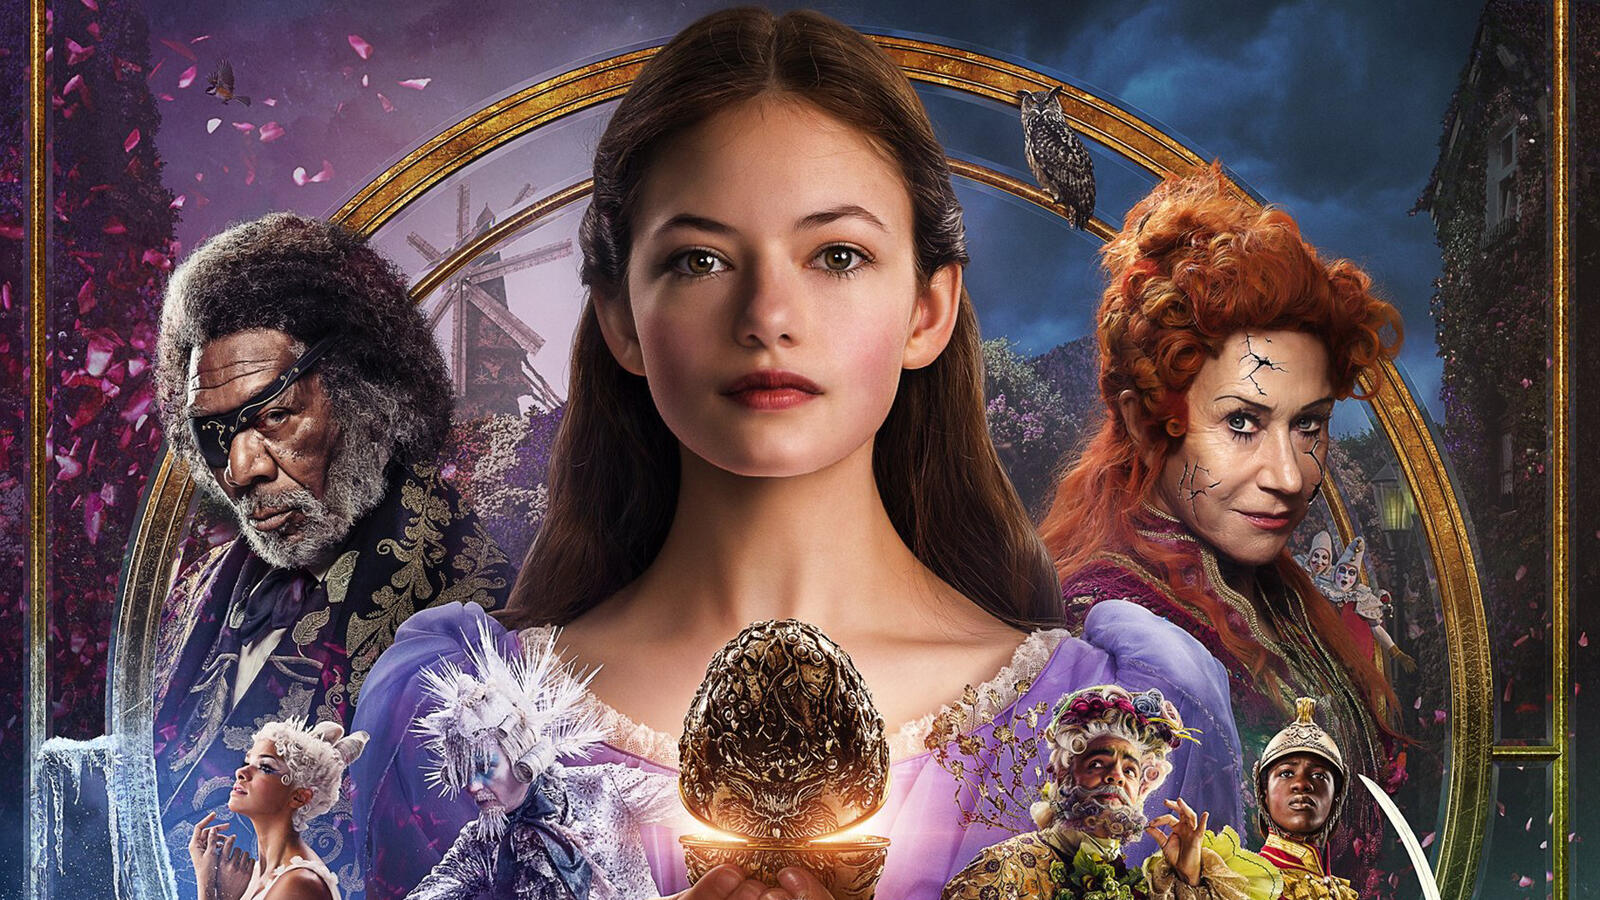 Wallpapers The Nutcracker And The Four Realms 2018 Movies Movies on the desktop